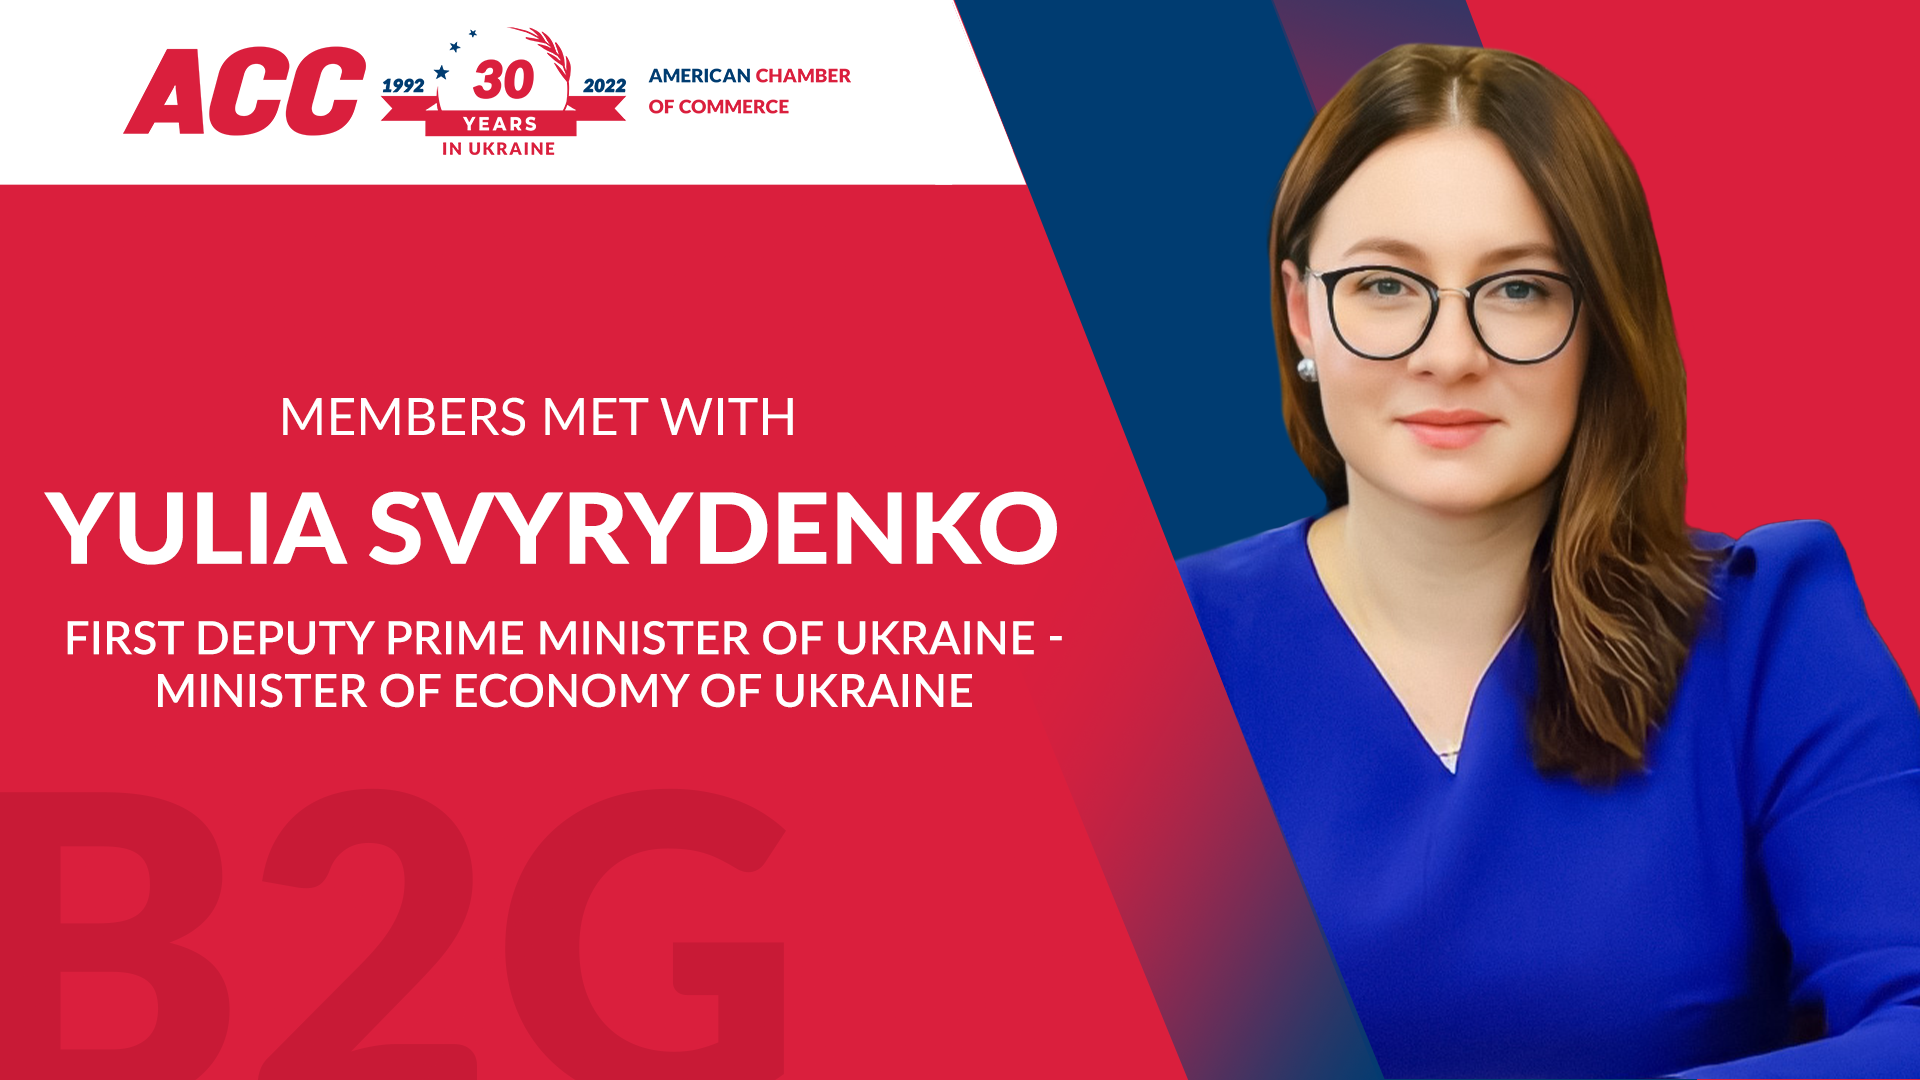 Online Meeting with Yulia Svyrydenko, First Deputy Prime Minister of Ukraine – Minister of Economy of Ukraine